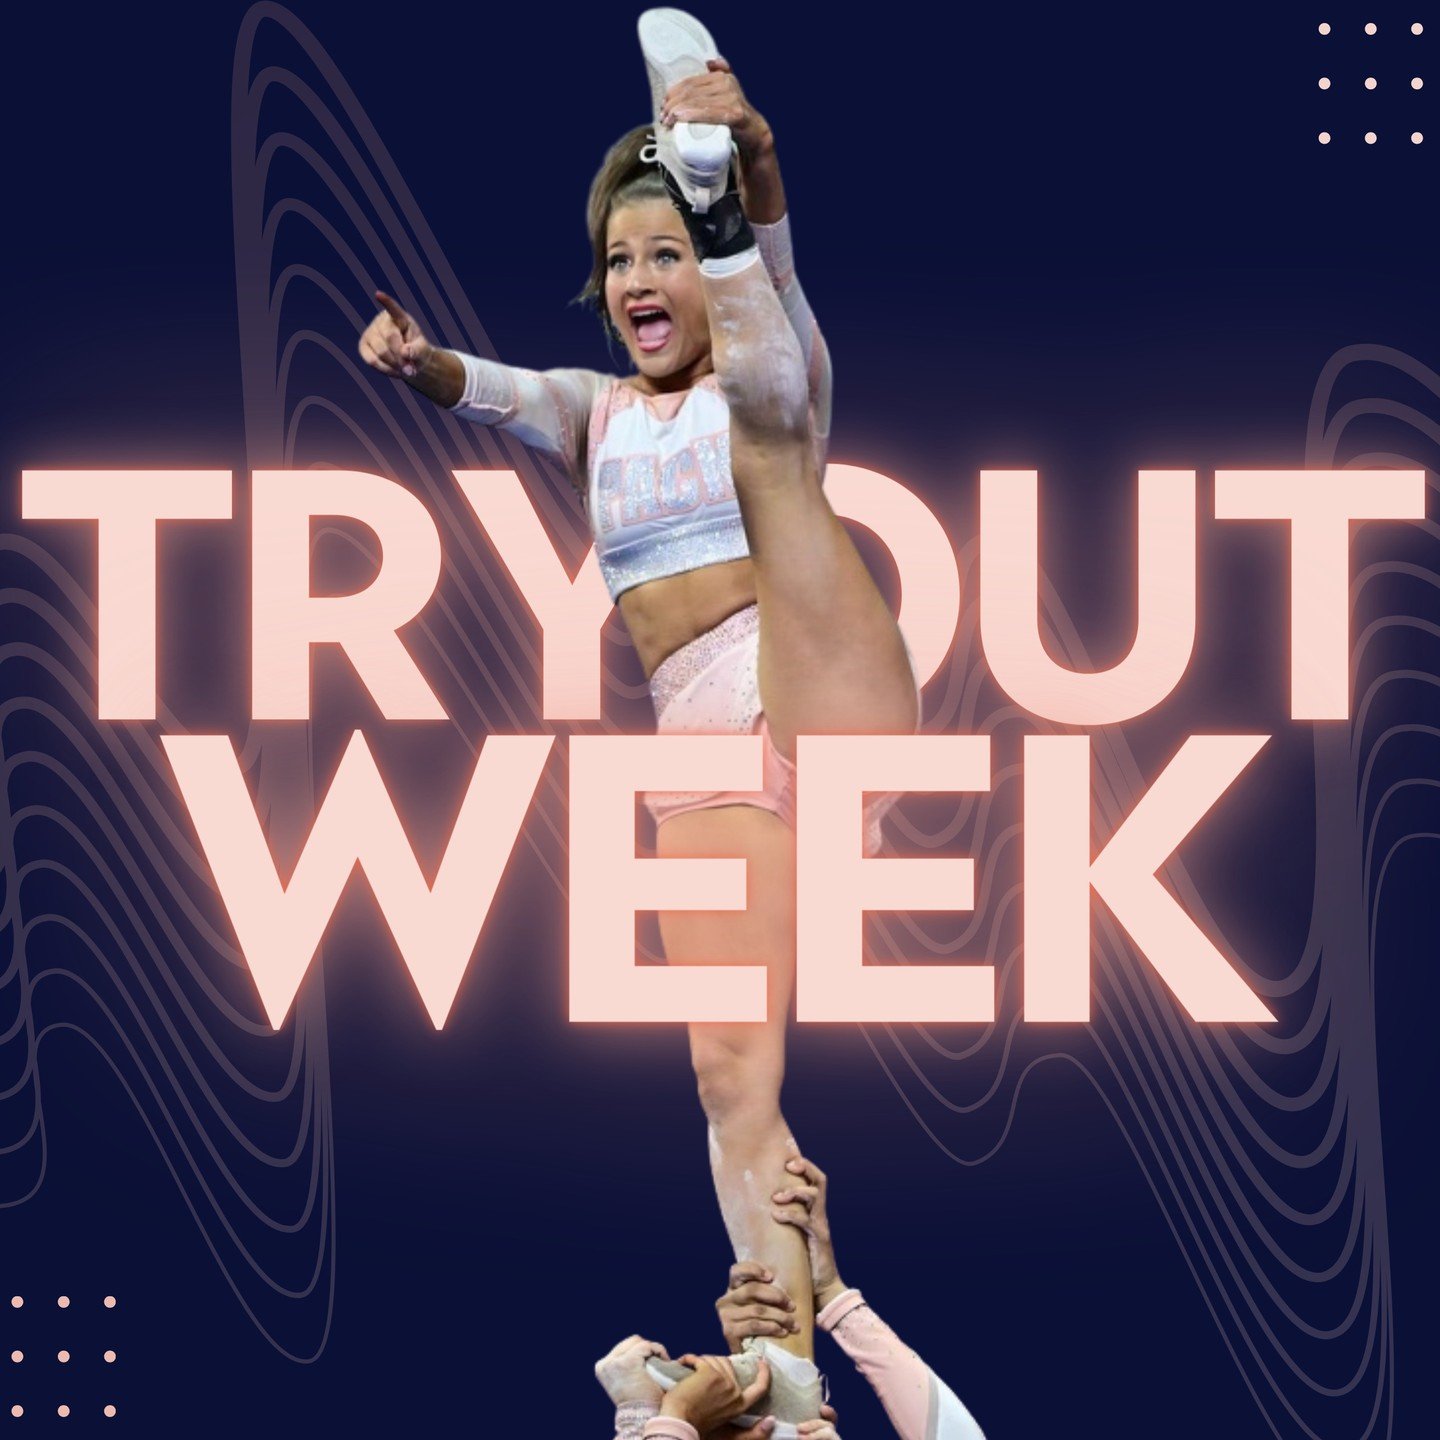 It&rsquo;s tryout week for Pack Athletics! Do you have questions about the tryouts, such as what to expect or what to wear? If so, just click here to see our tryout guide! We're excited to see you in action! --&gt; Link in Bio